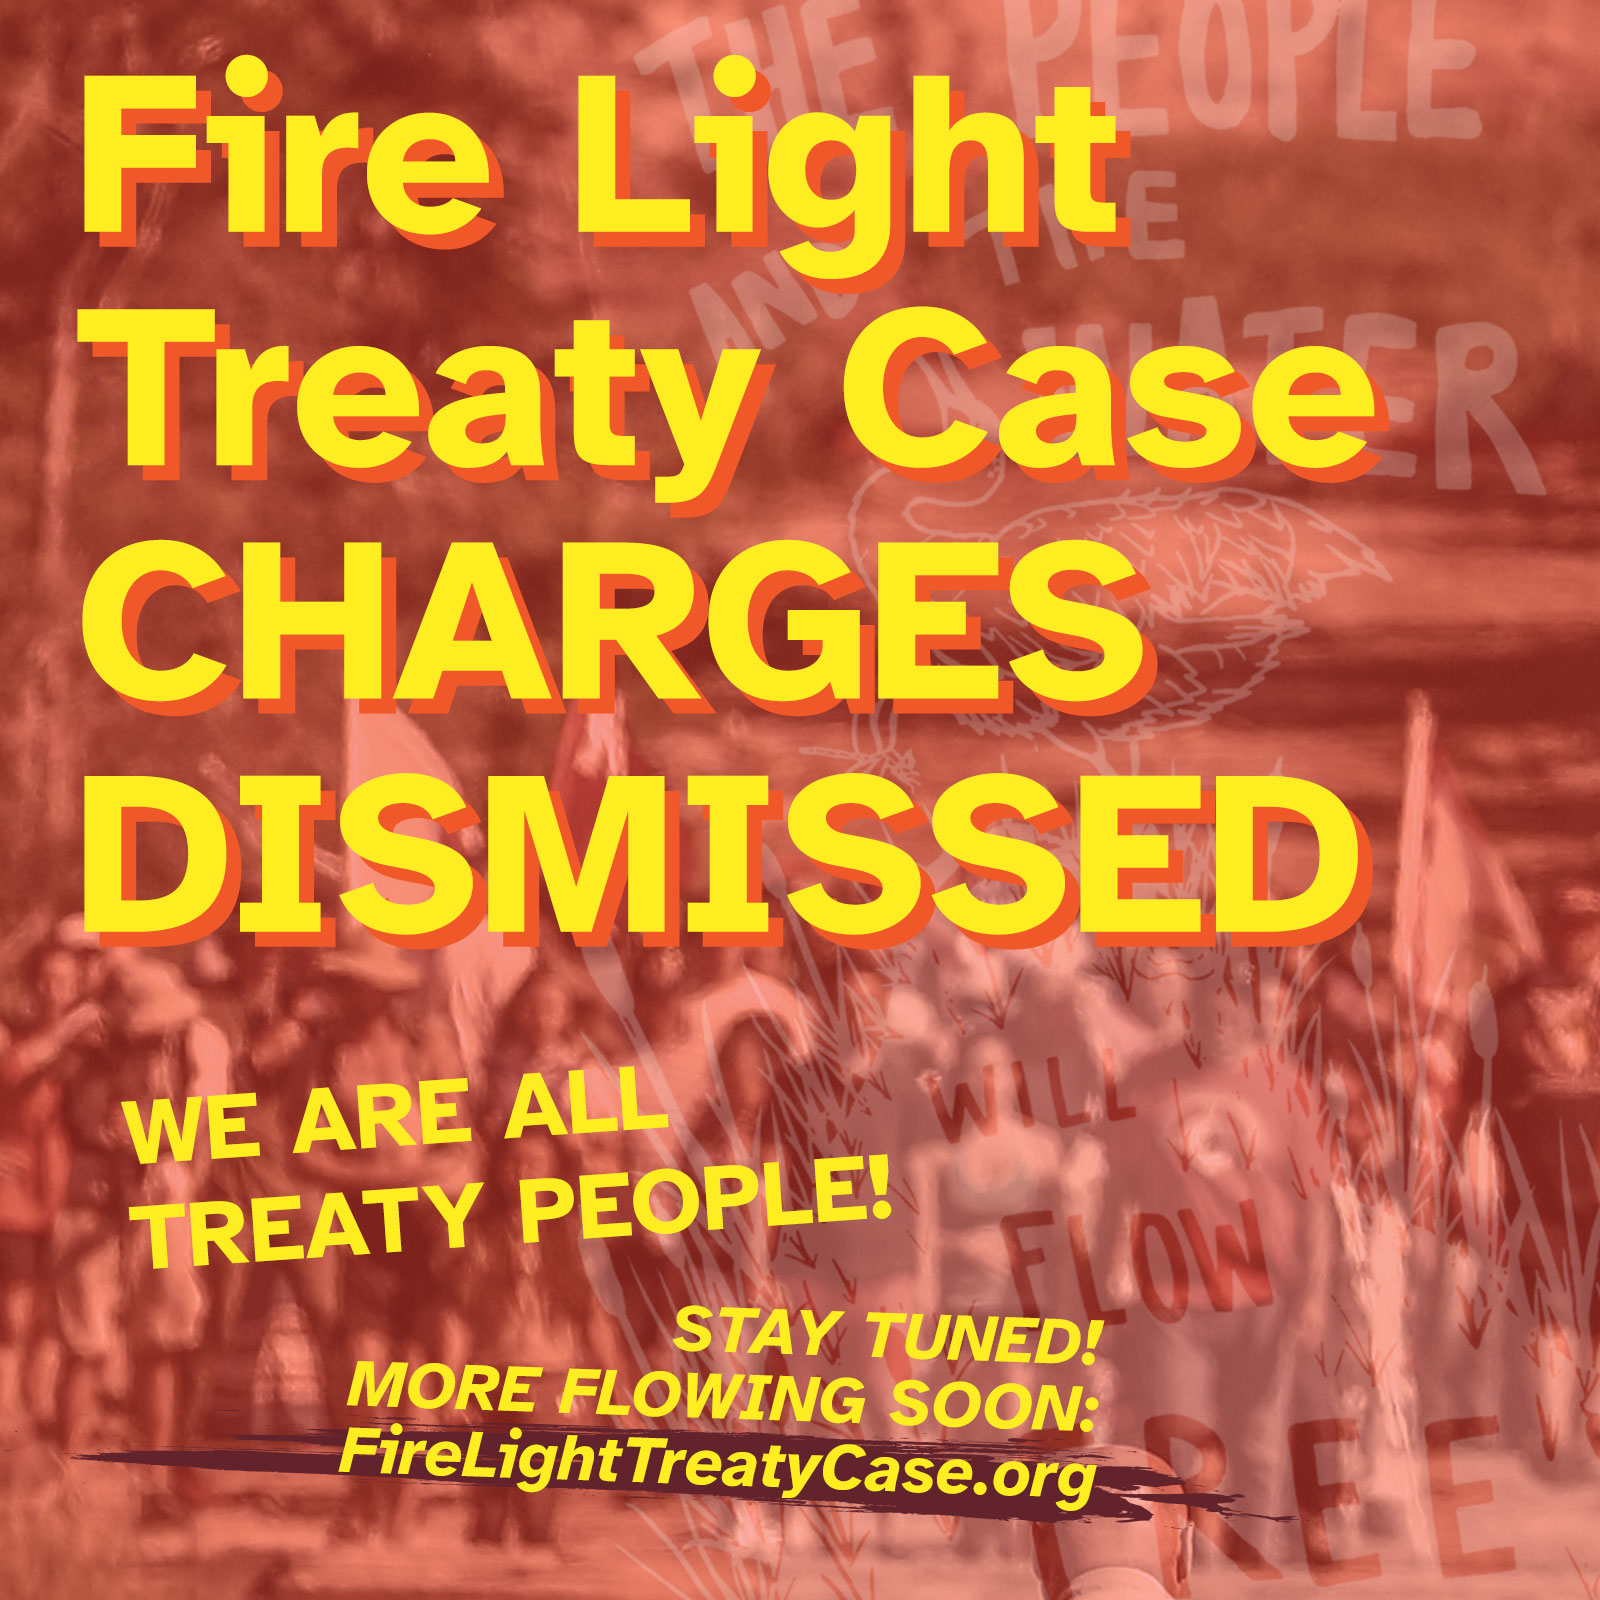 Fire Light Treaty Case Charges Dismissed